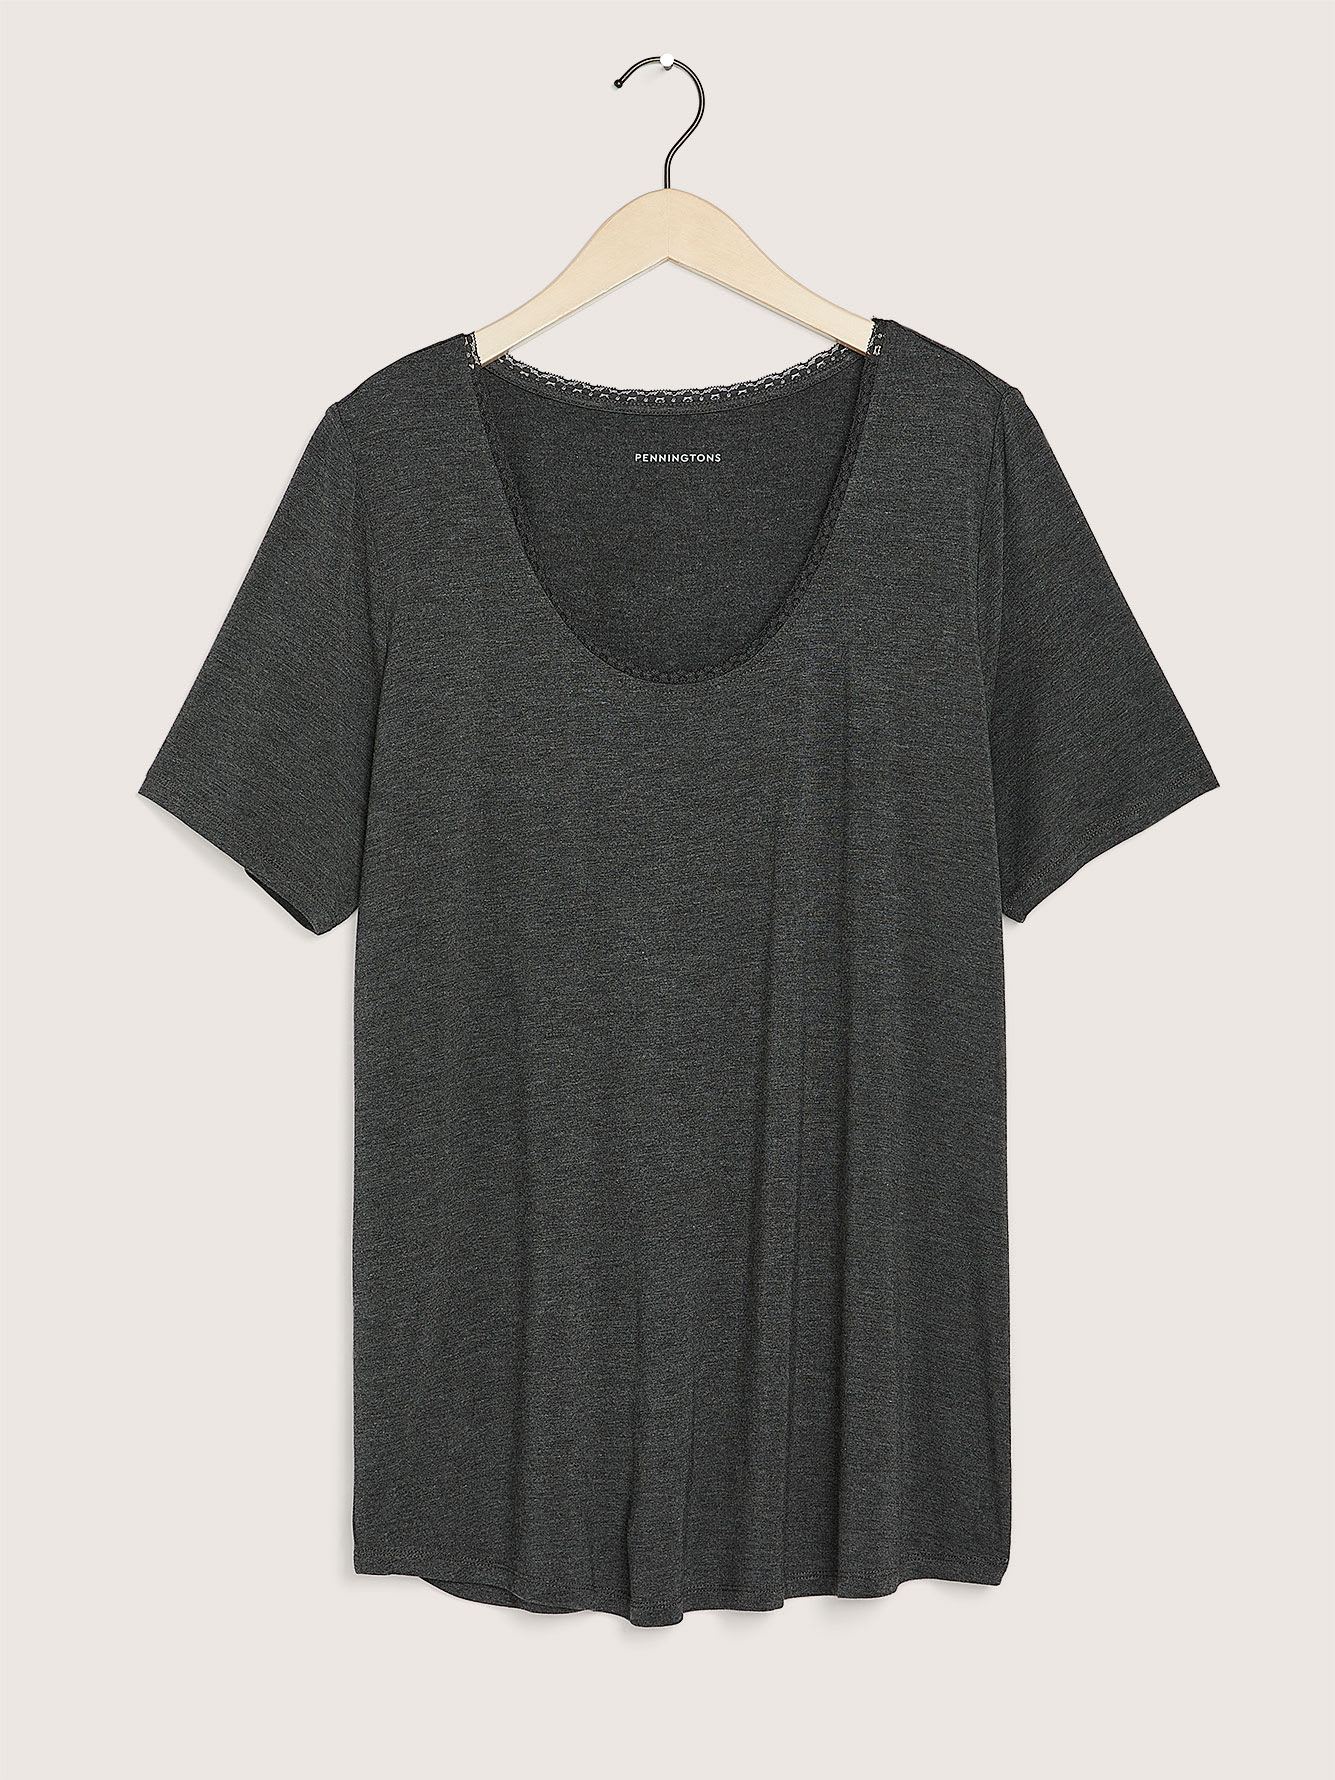 Responsible, Short-Sleeve Tee with Lace Detailed Neckline | Penningtons